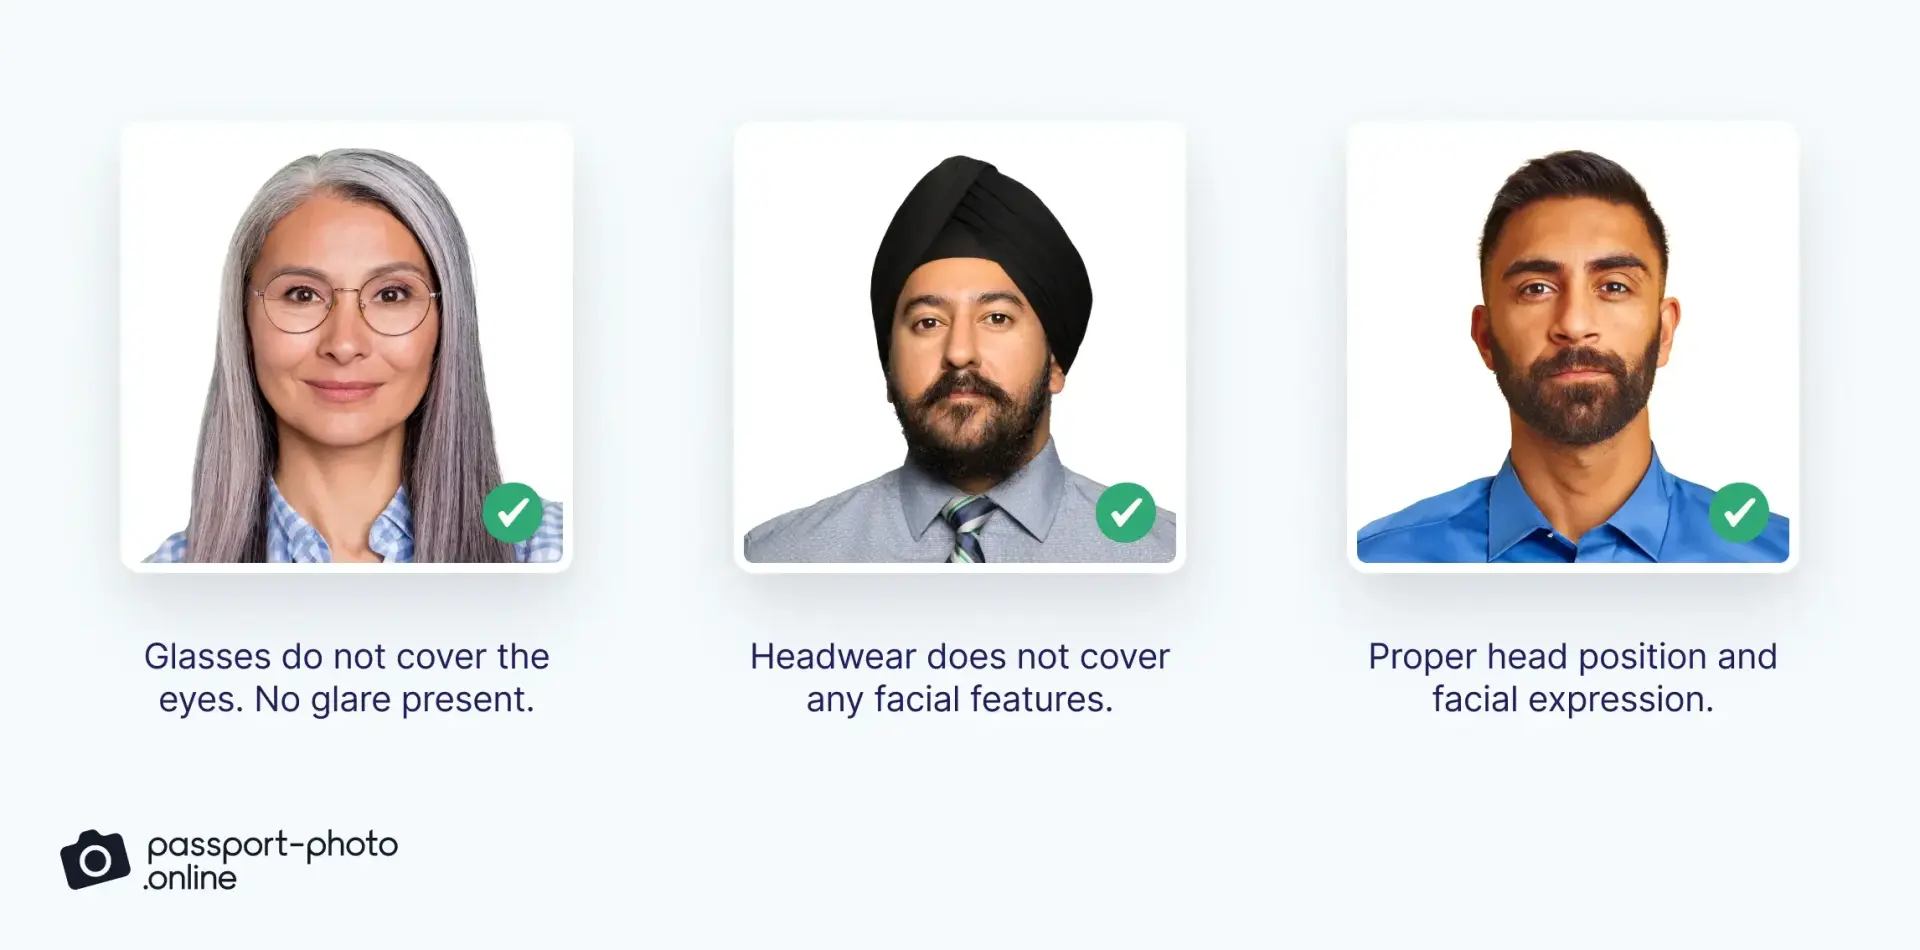 Three picture examples of compliant Indian visa photos depicting the rules for glasses, religious headwear, and correct head position.